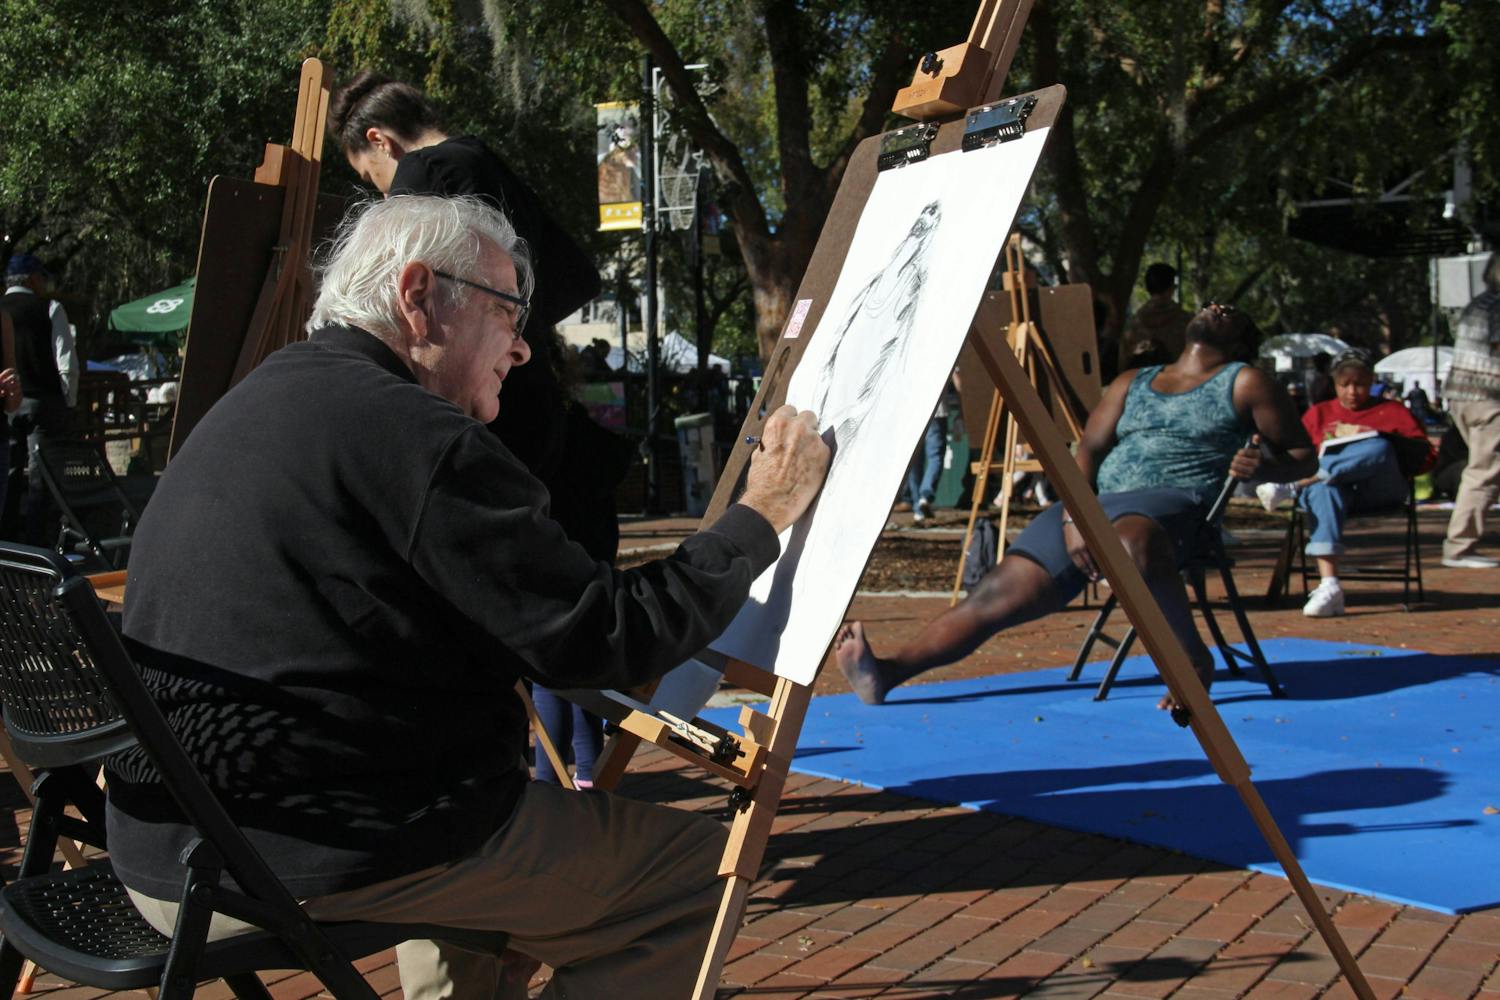 The 40th Downtown Festival &amp; Art Show was shortened to one day due to rainy weather. Various artists showcased their work in downtown Gainesville this weekend, from paintings, sculptures and jewelry to dance, and more. There was also a children's activities area that allowed little artists to create their own masterpieces.&nbsp;